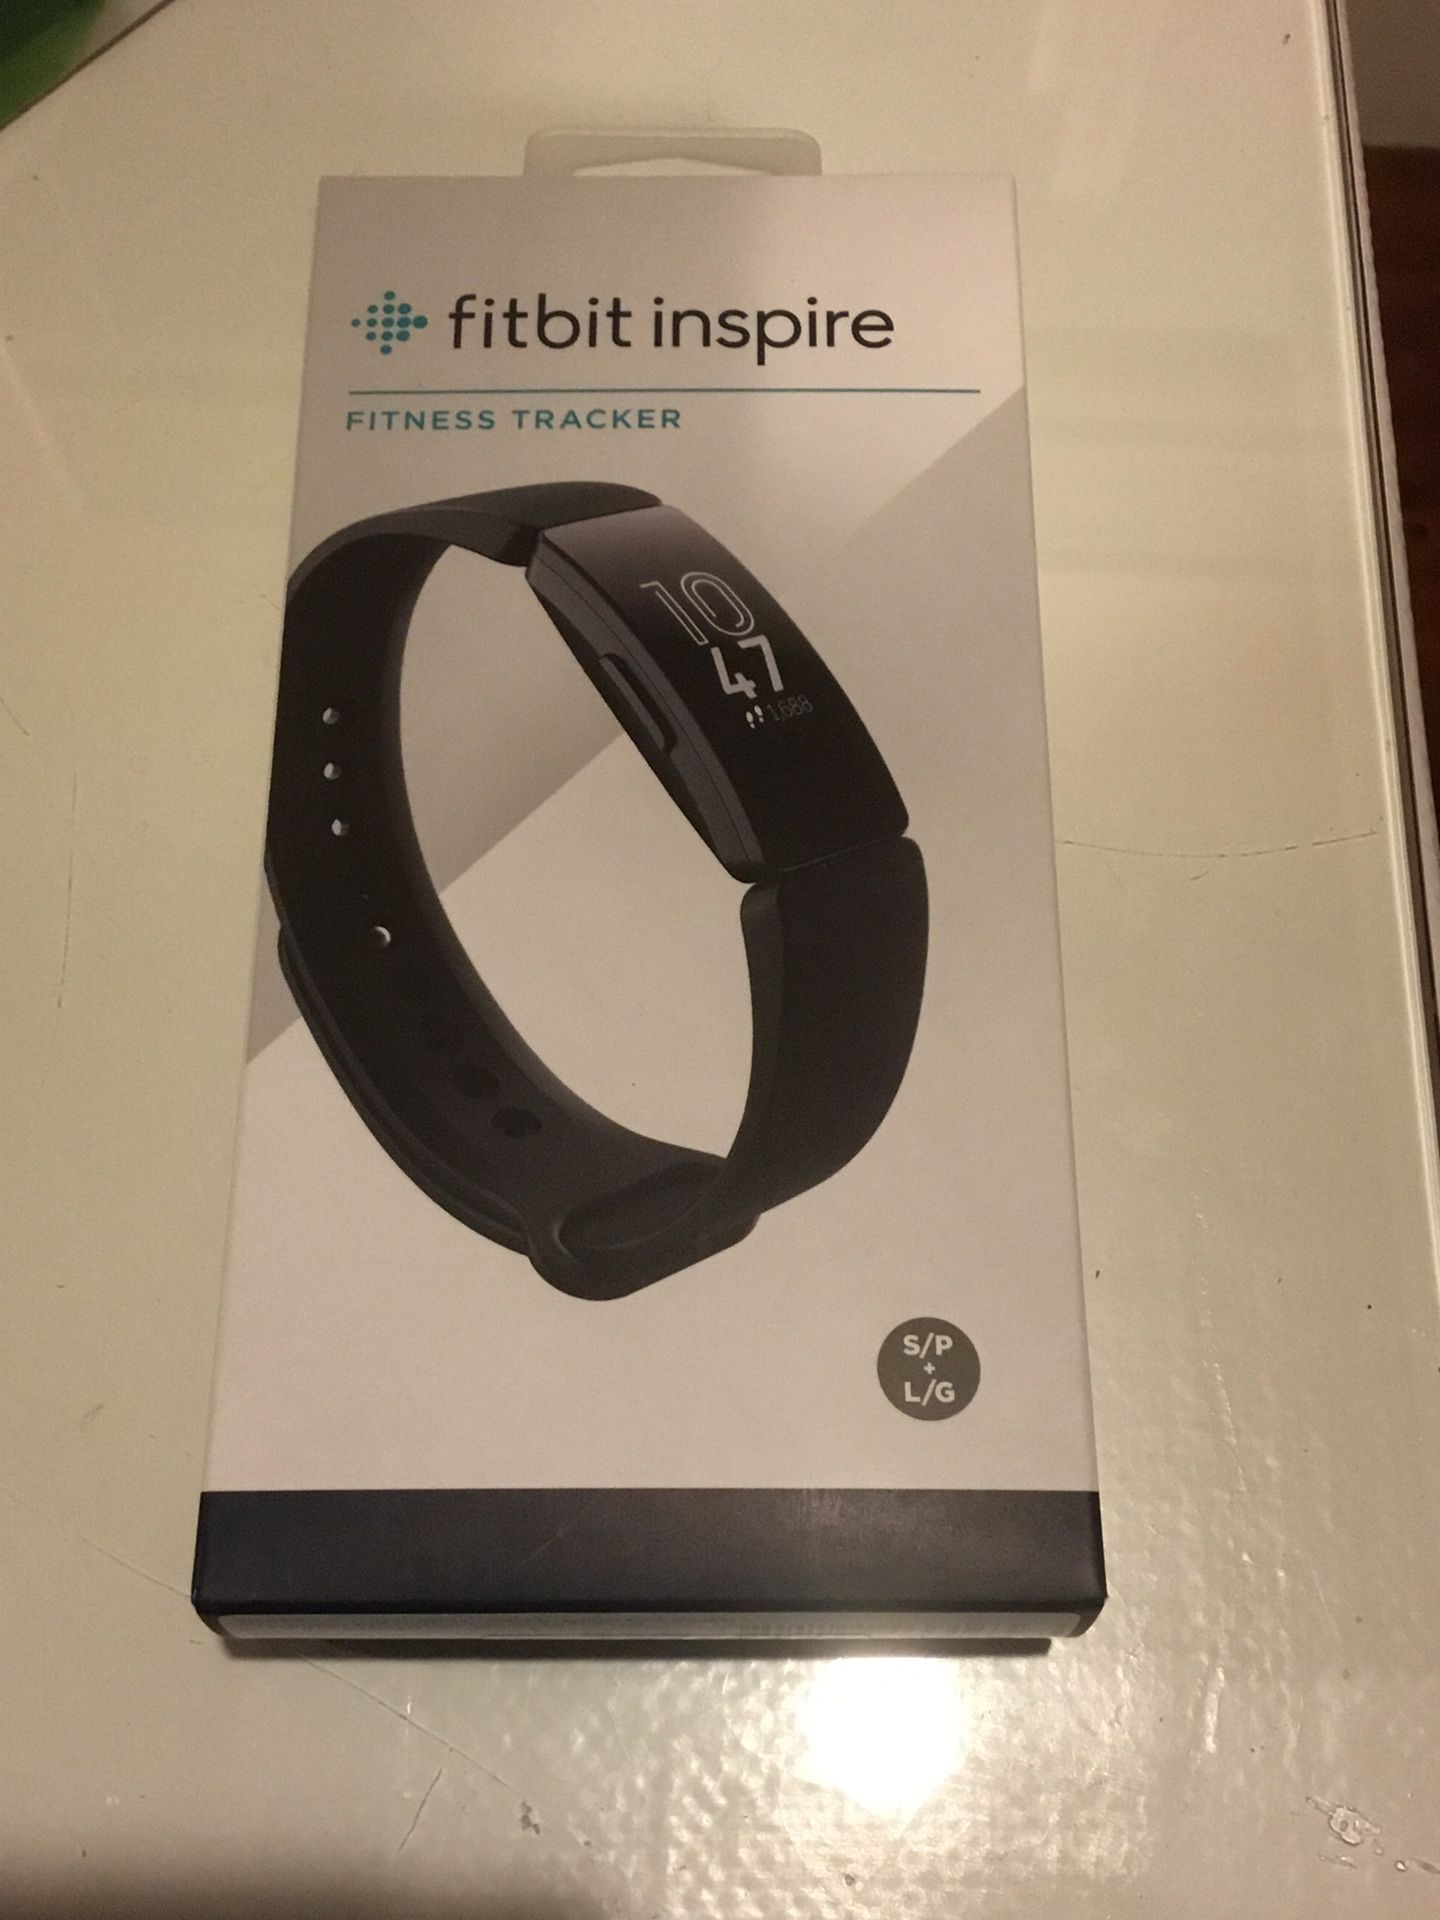 Fitbit Inspire: brand new in sealed box. MSRP is $69.95